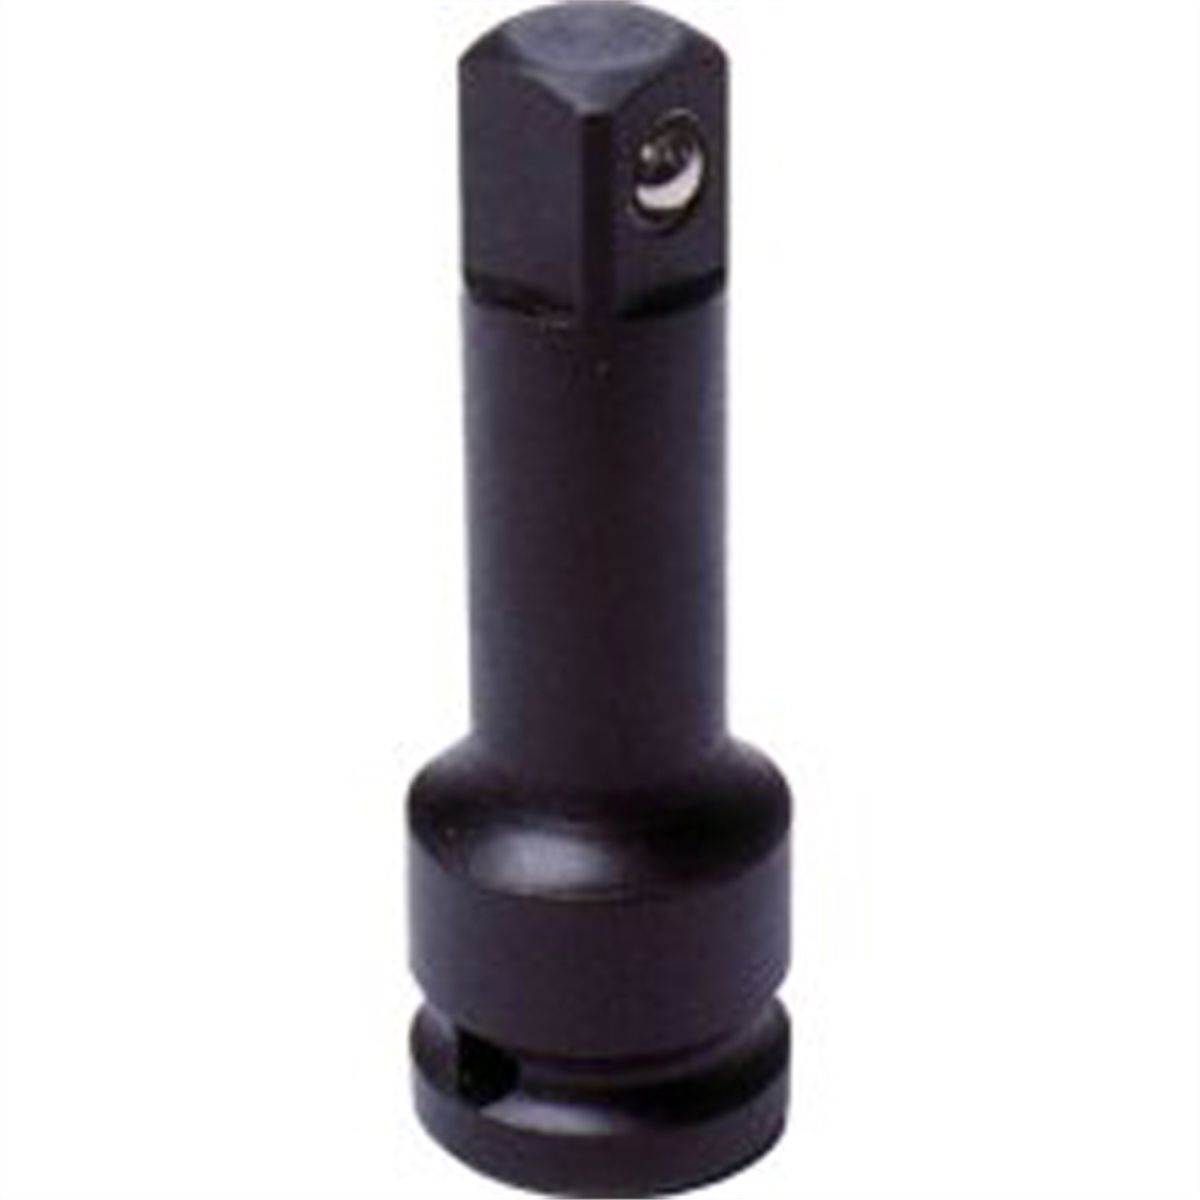 1/4" Drive x 2" Extension w/ Friction Ball